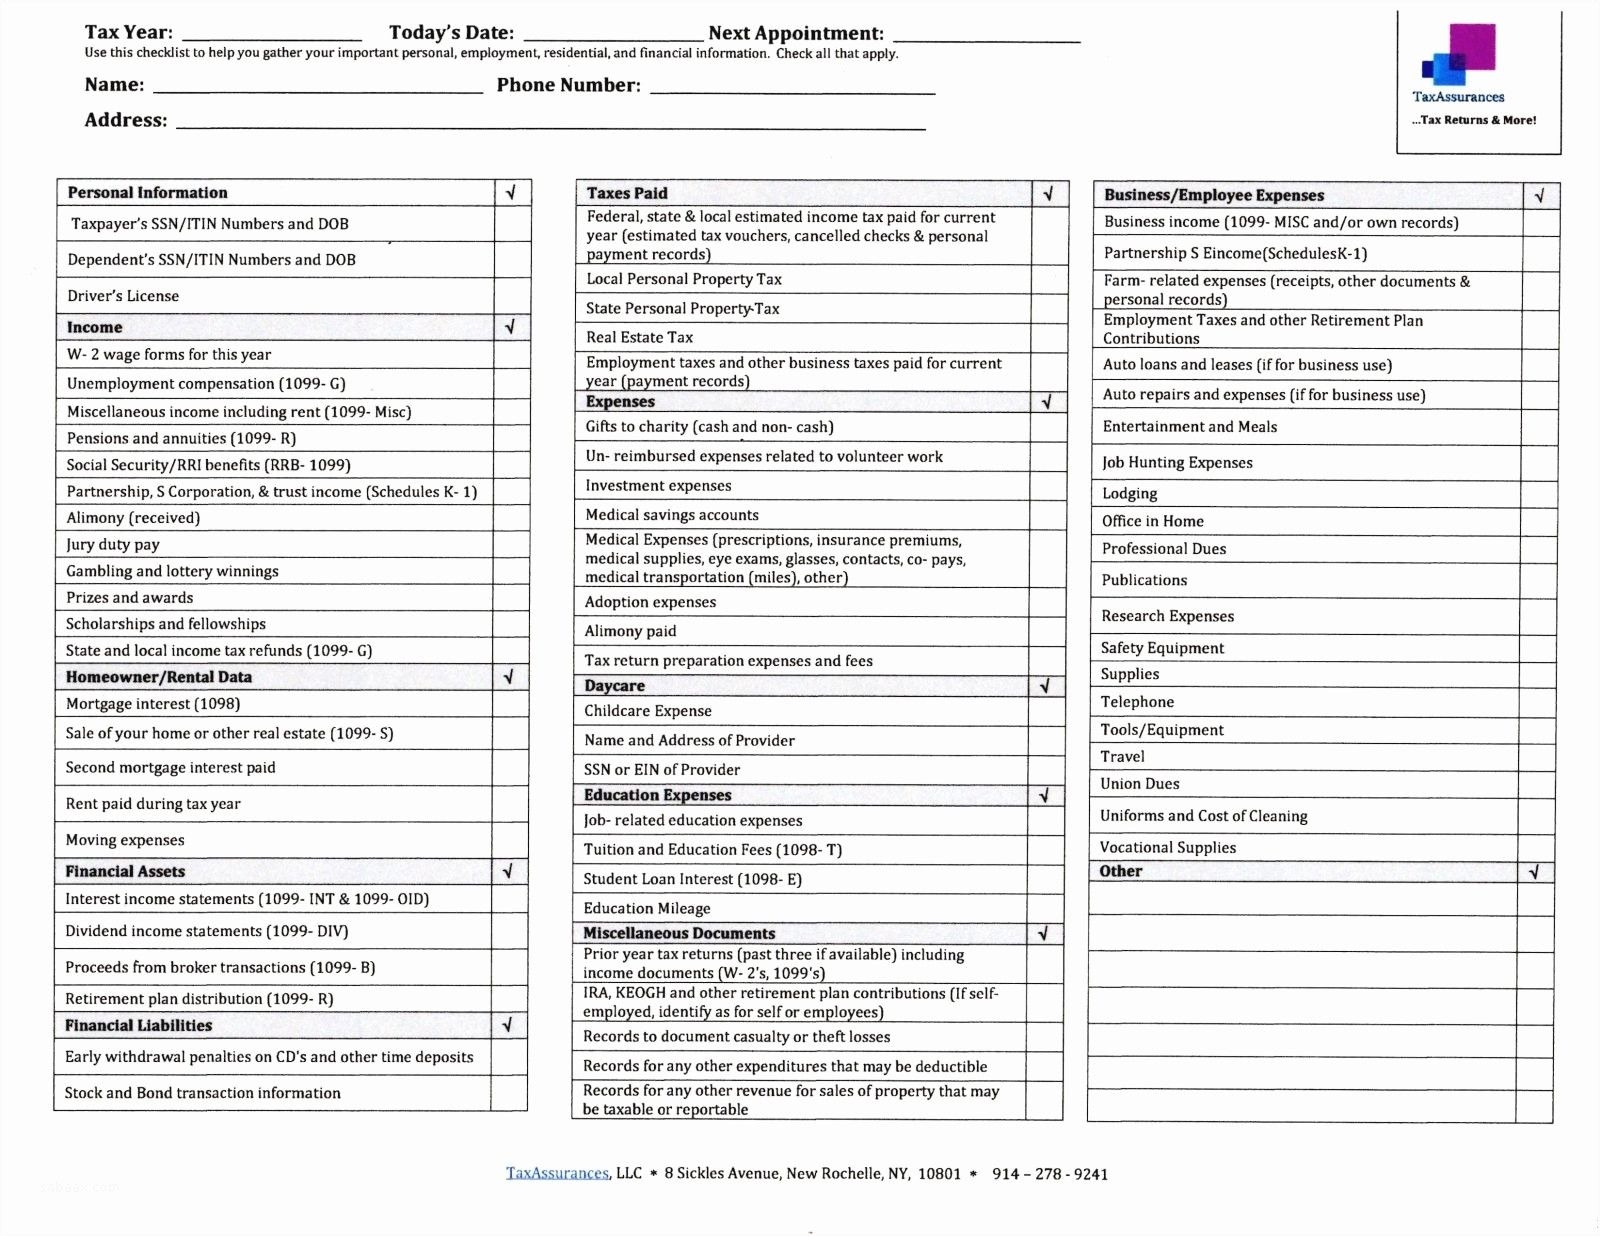 NewBest Of Self Employed Tax Deductions Worksheet Check More At Https www kuprik se self e Chemistry Worksheets Tax Deductions Science Teaching Resources